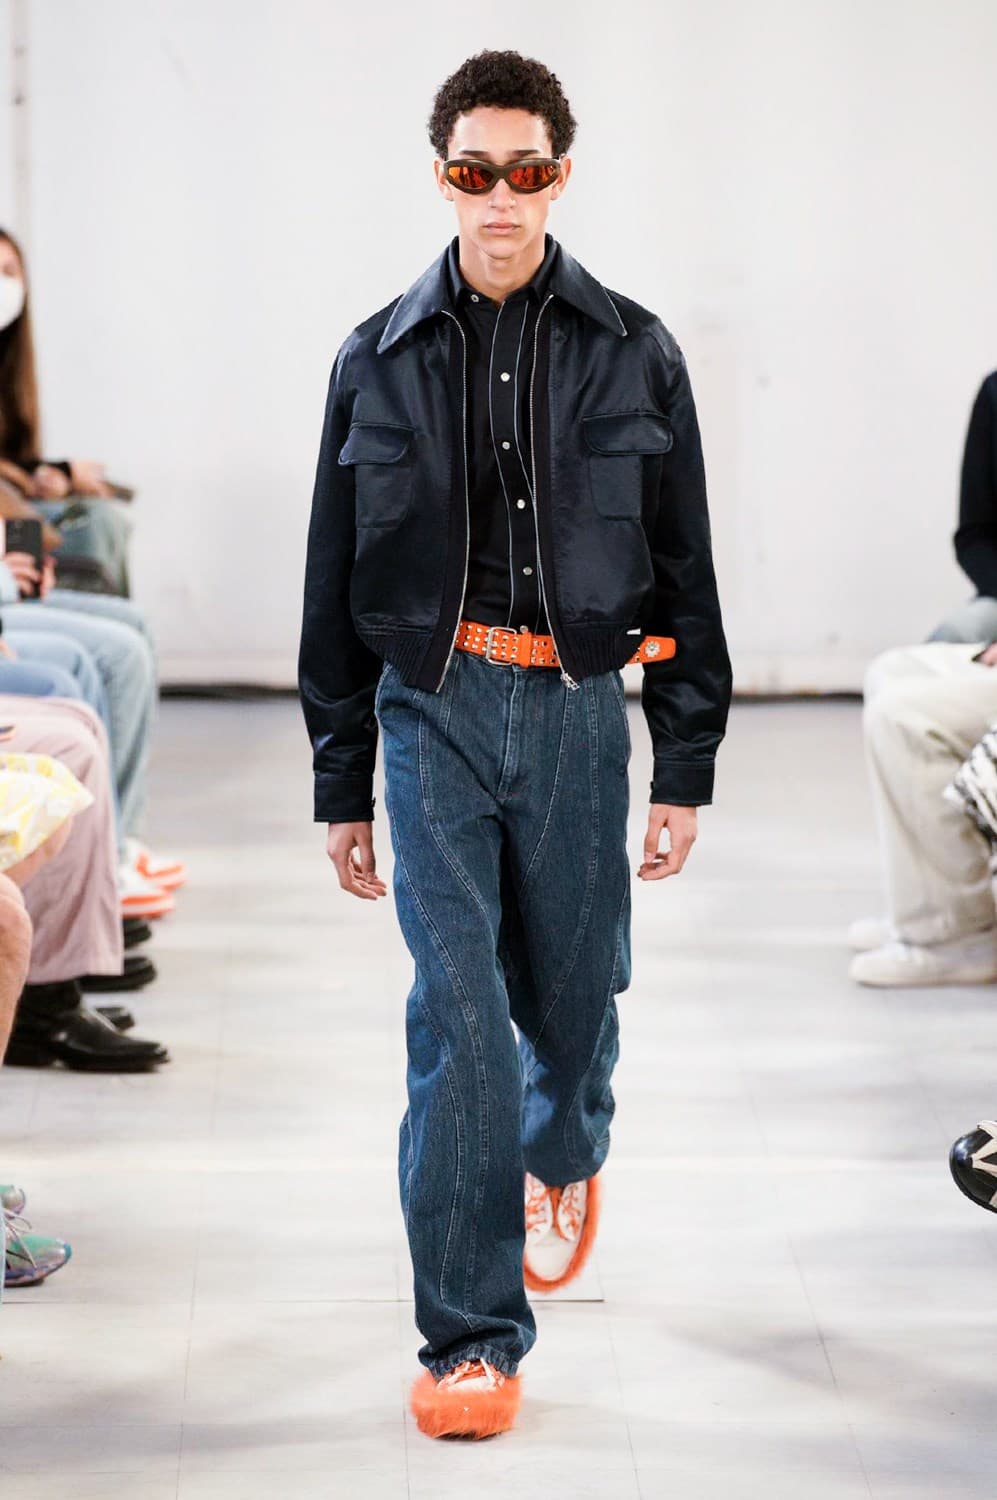 Bluemarble Fall 2022 Men's Fashion Show Review | The Impression